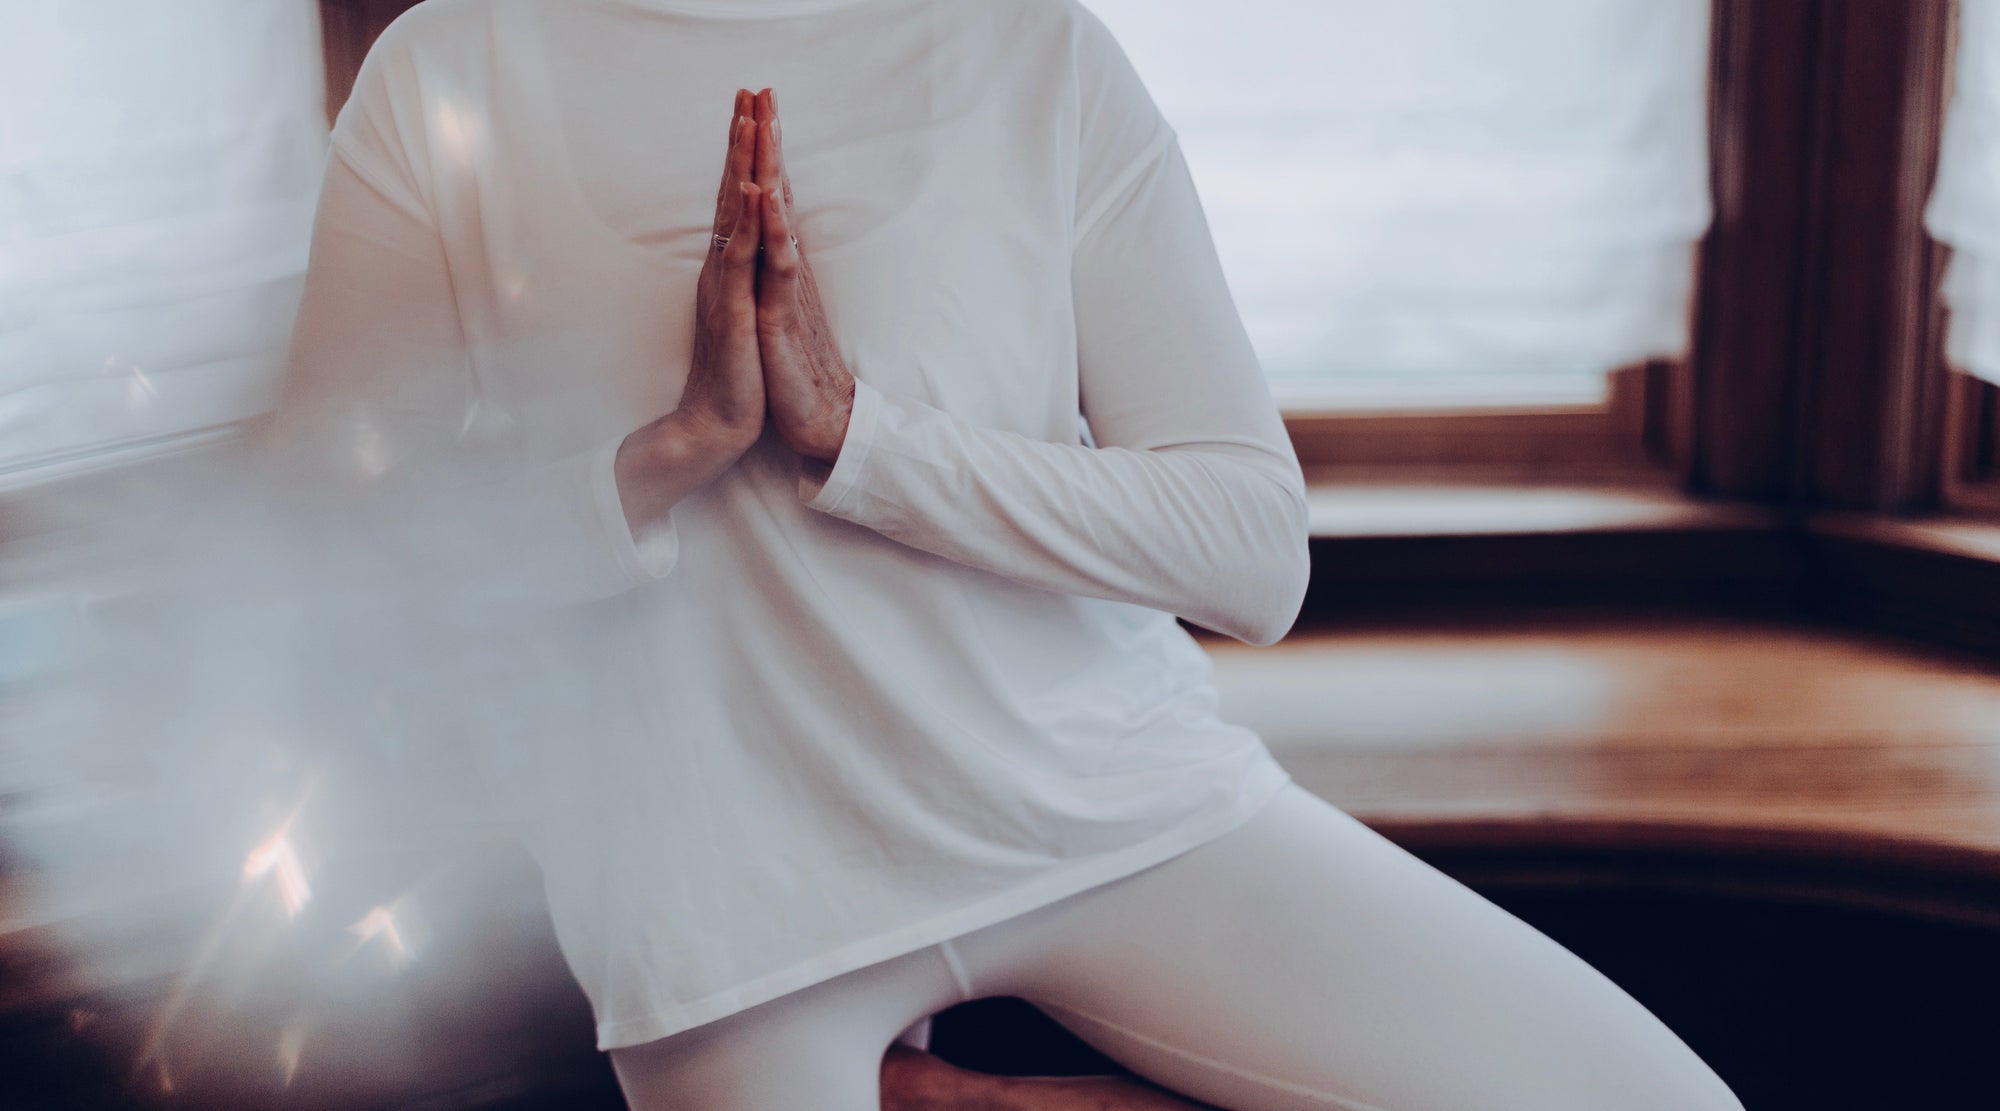 TOP 10 Tips to Start Your Home Yoga and Meditation Practice